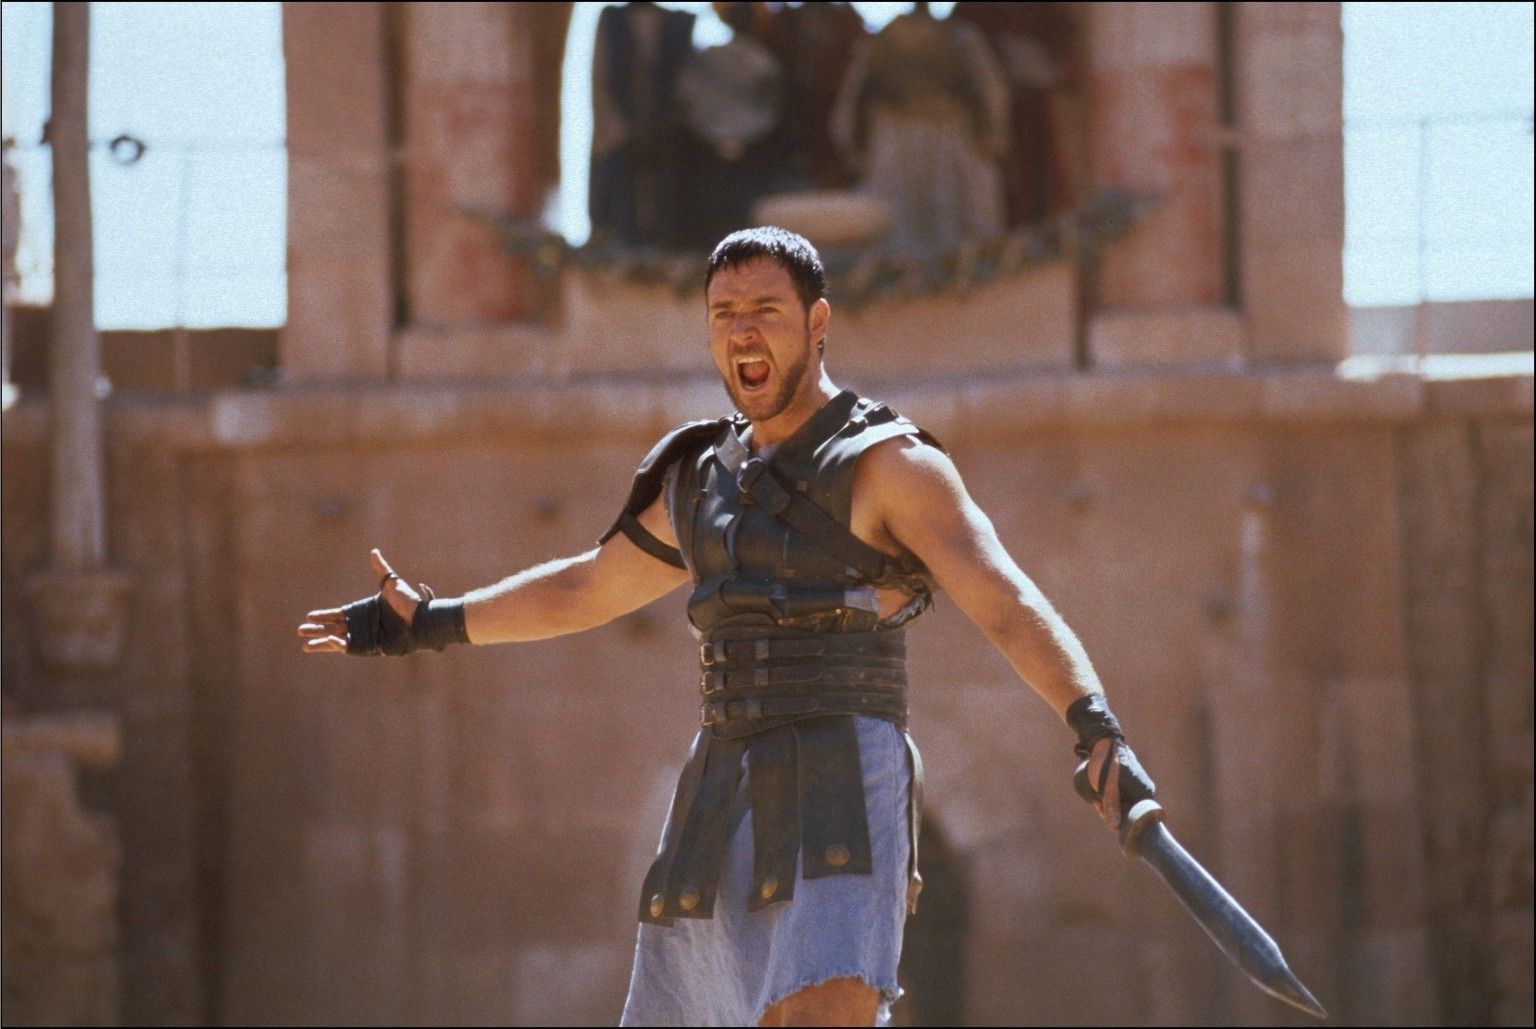 Gladiator (movie), Russell Crowe Wallpaper HD / Desktop and Mobile Background